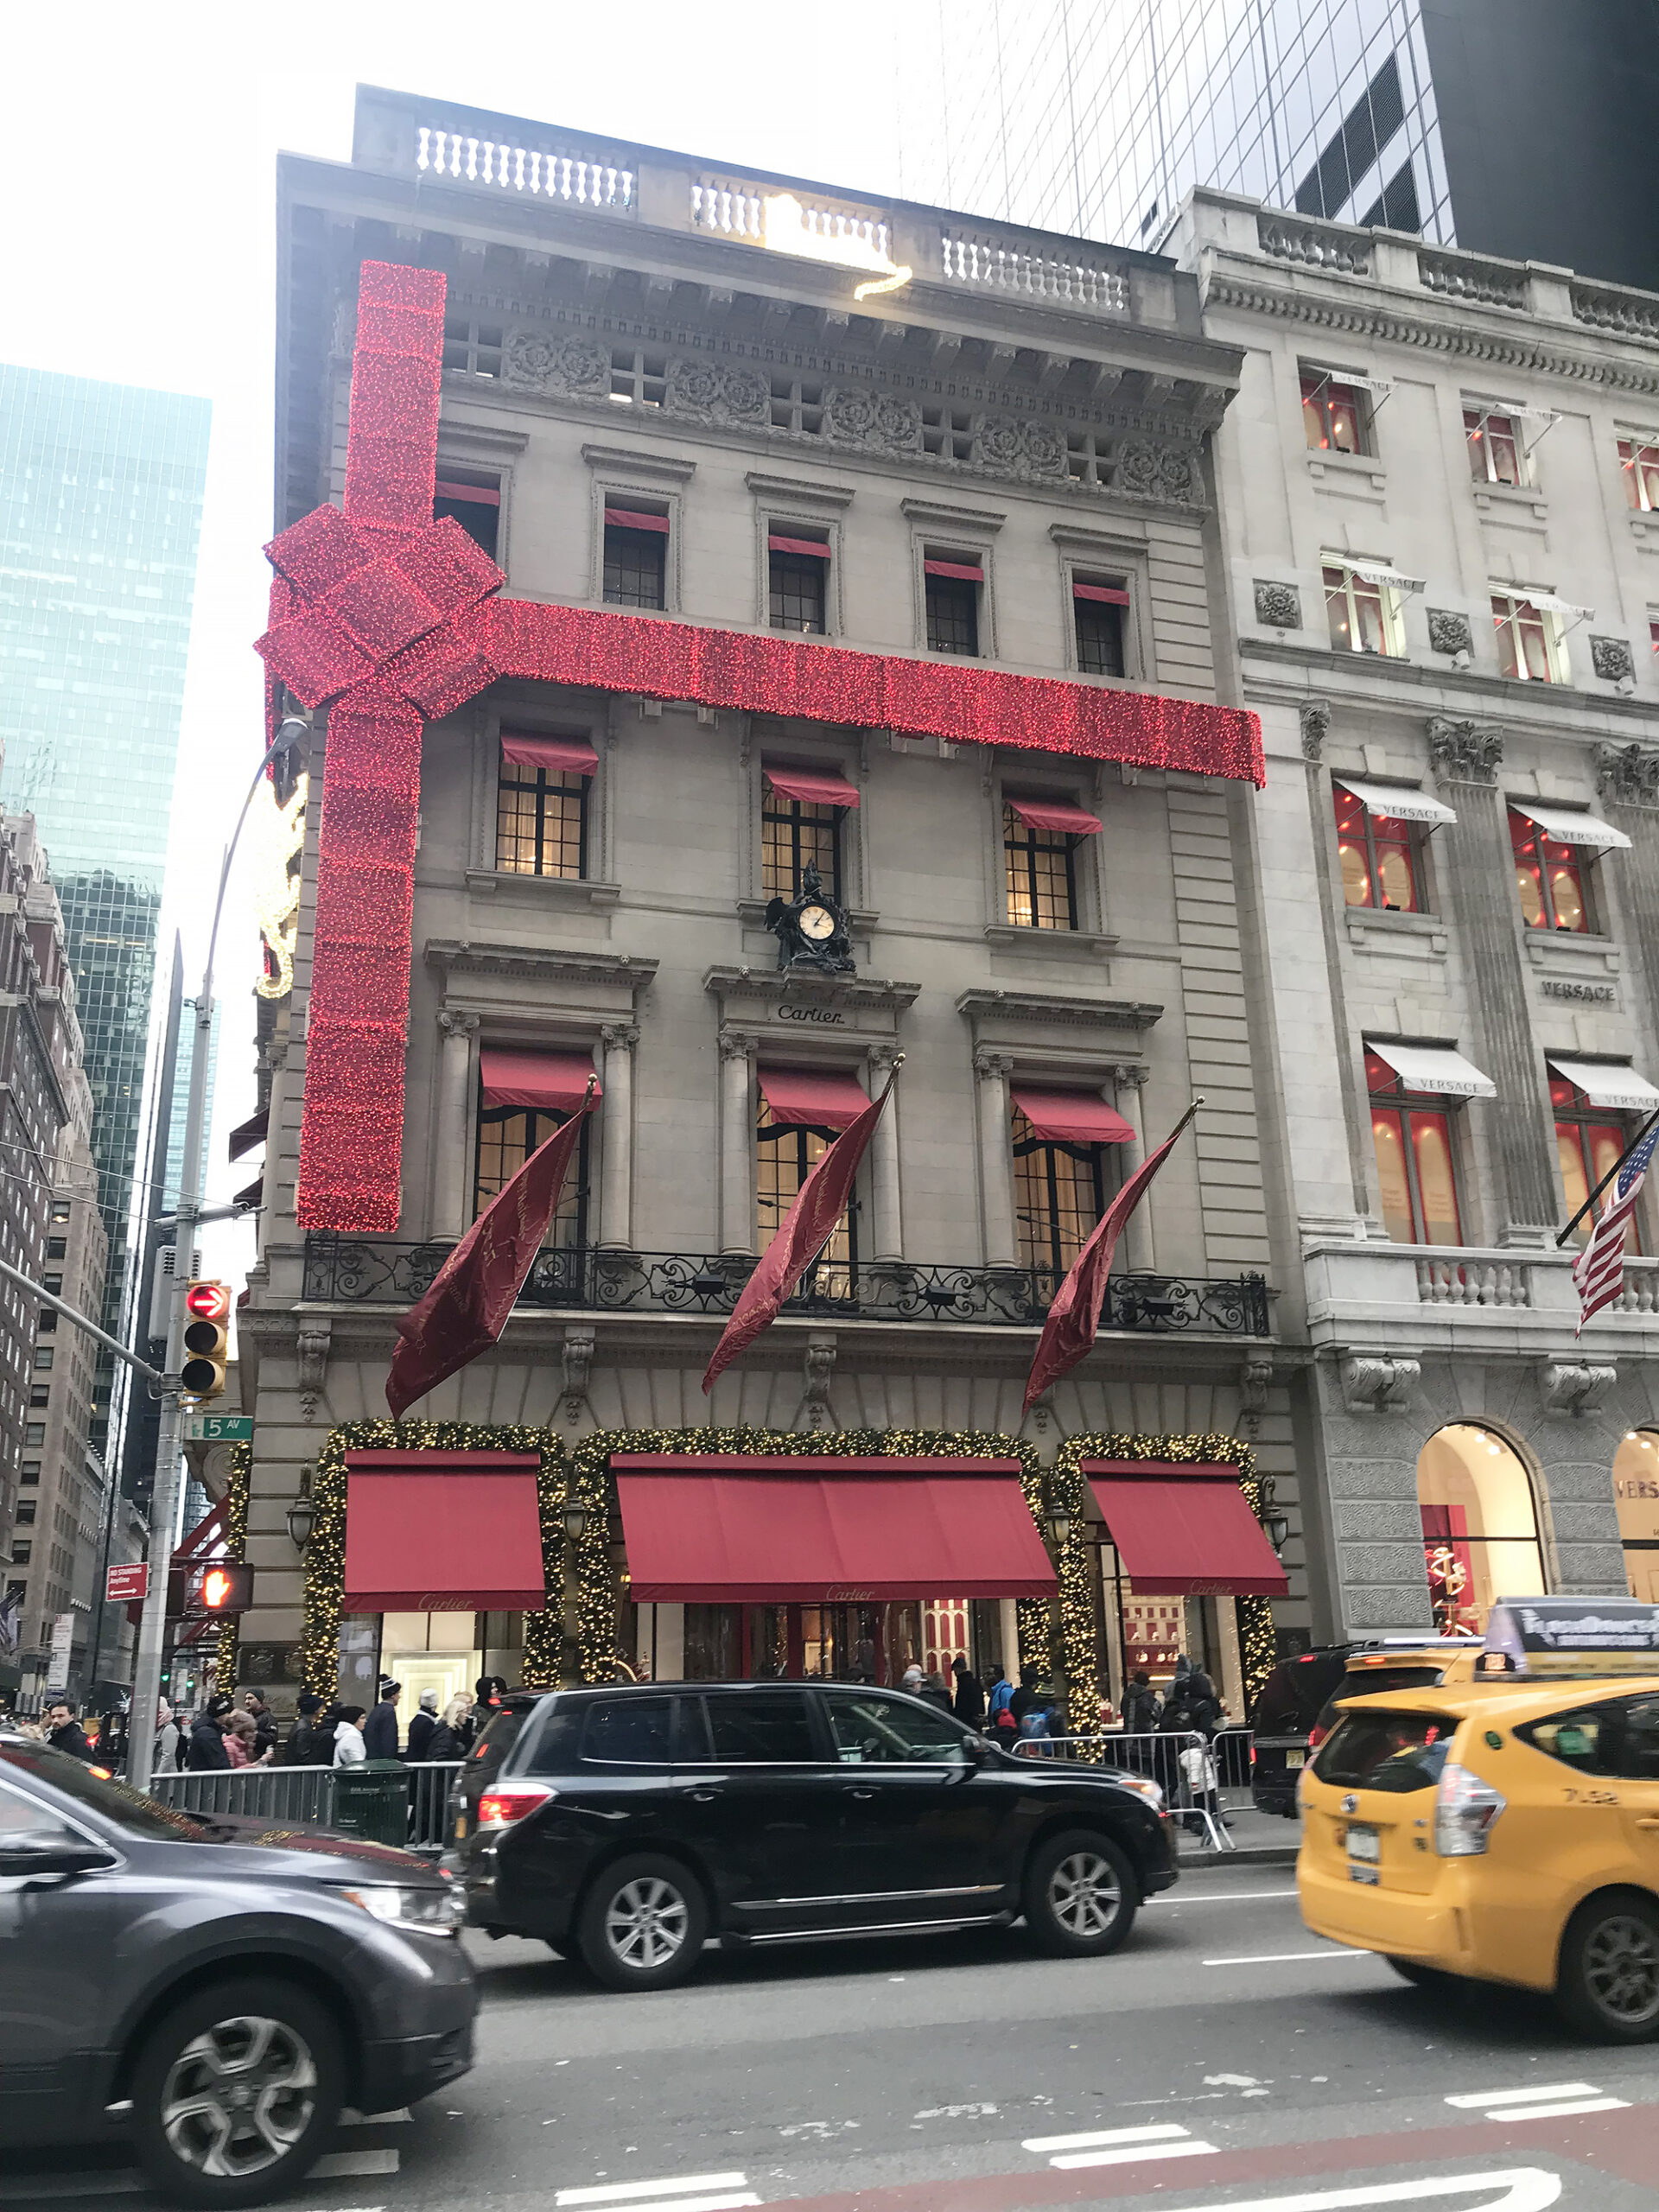 Cartier Christmas Our Favorite Things to Do in New York City that will make your trip memorable, festive and of course magical! Red wreaths on doors and windows Darling Darleen Top Lifestyle blogger